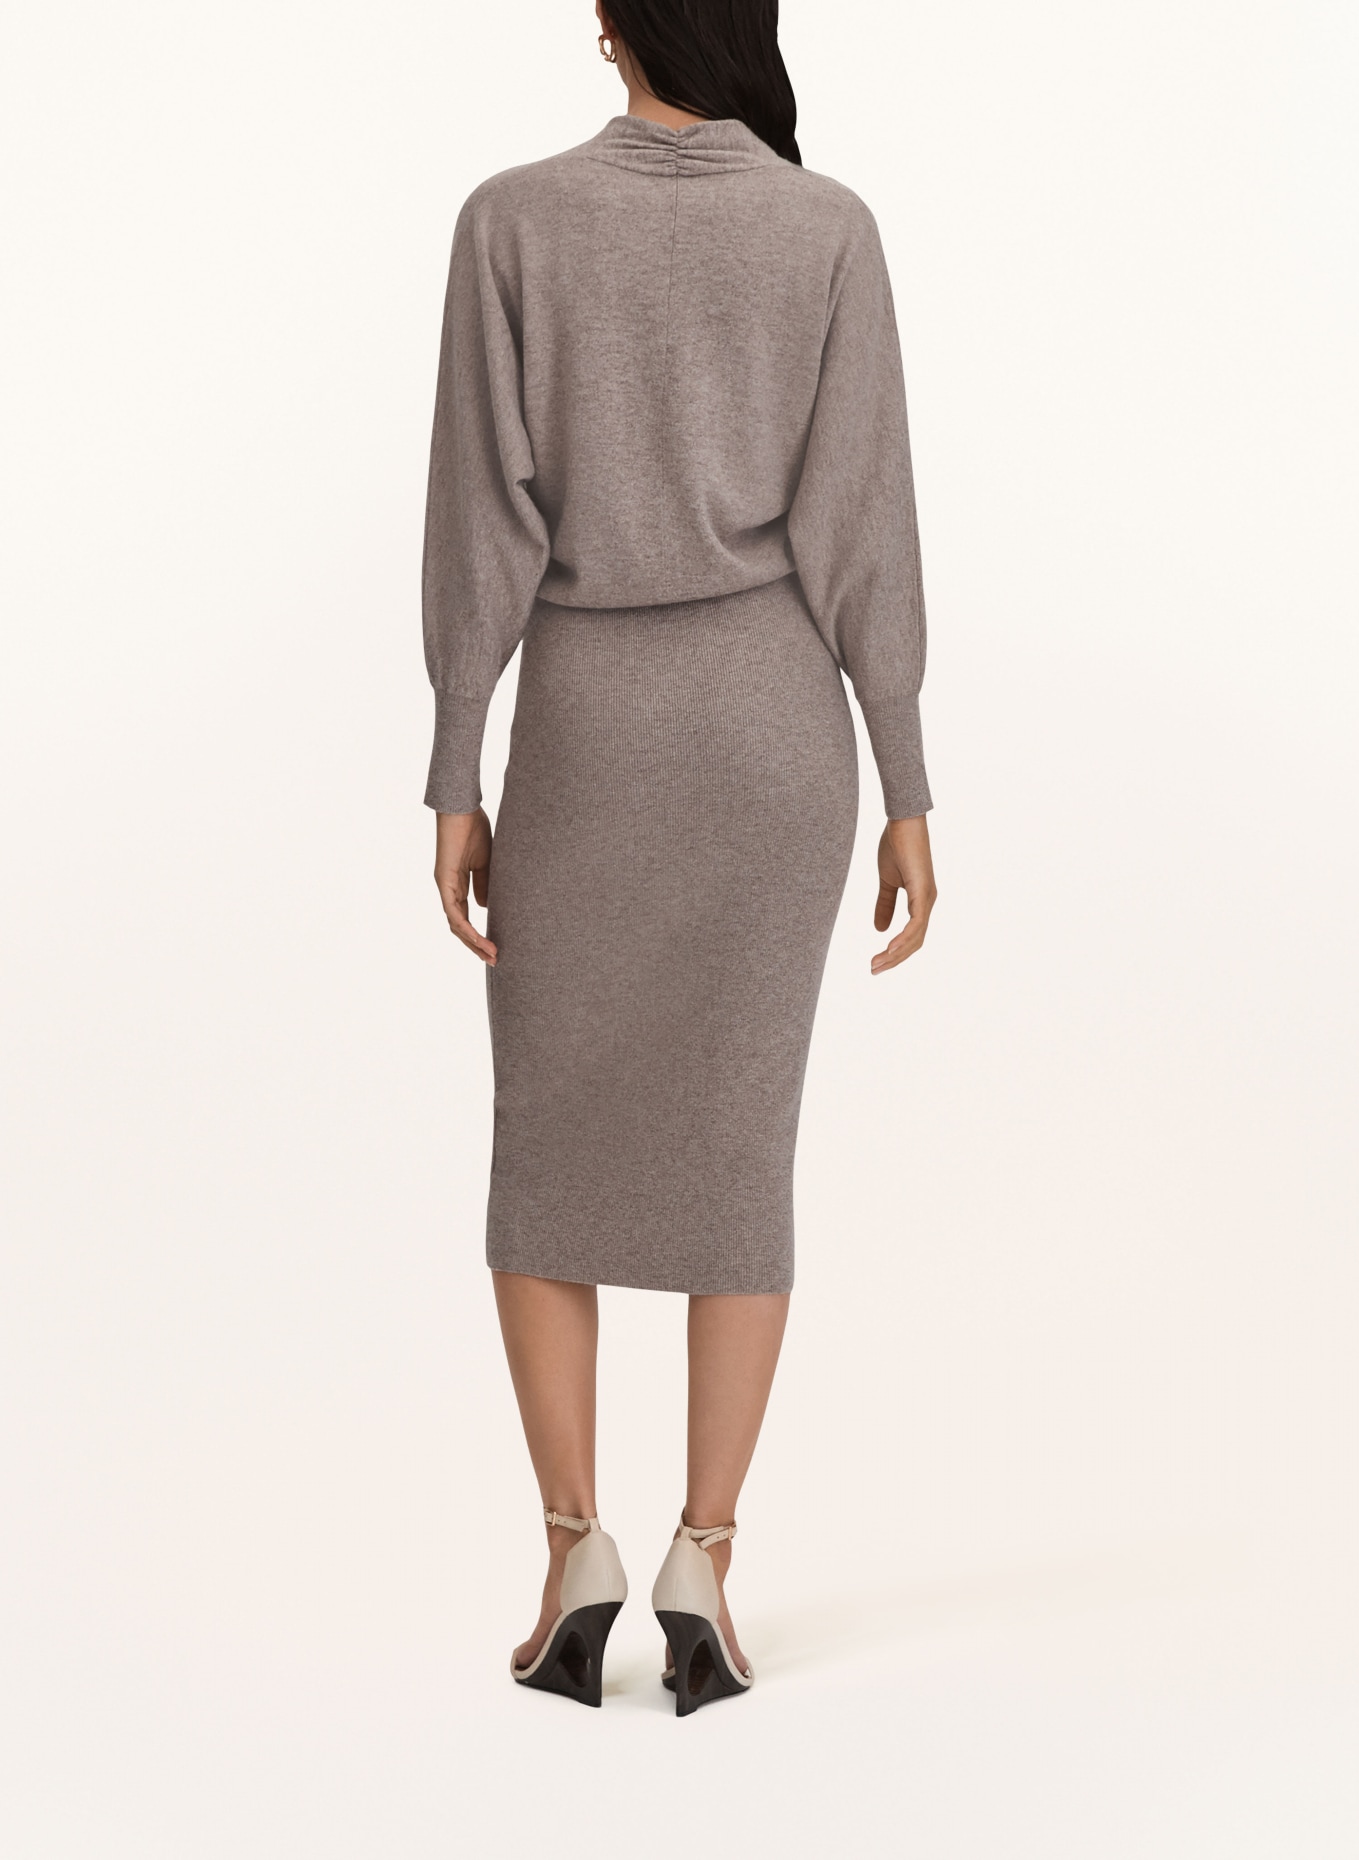 REISS Knit dress SALLY, Color: BEIGE (Image 3)